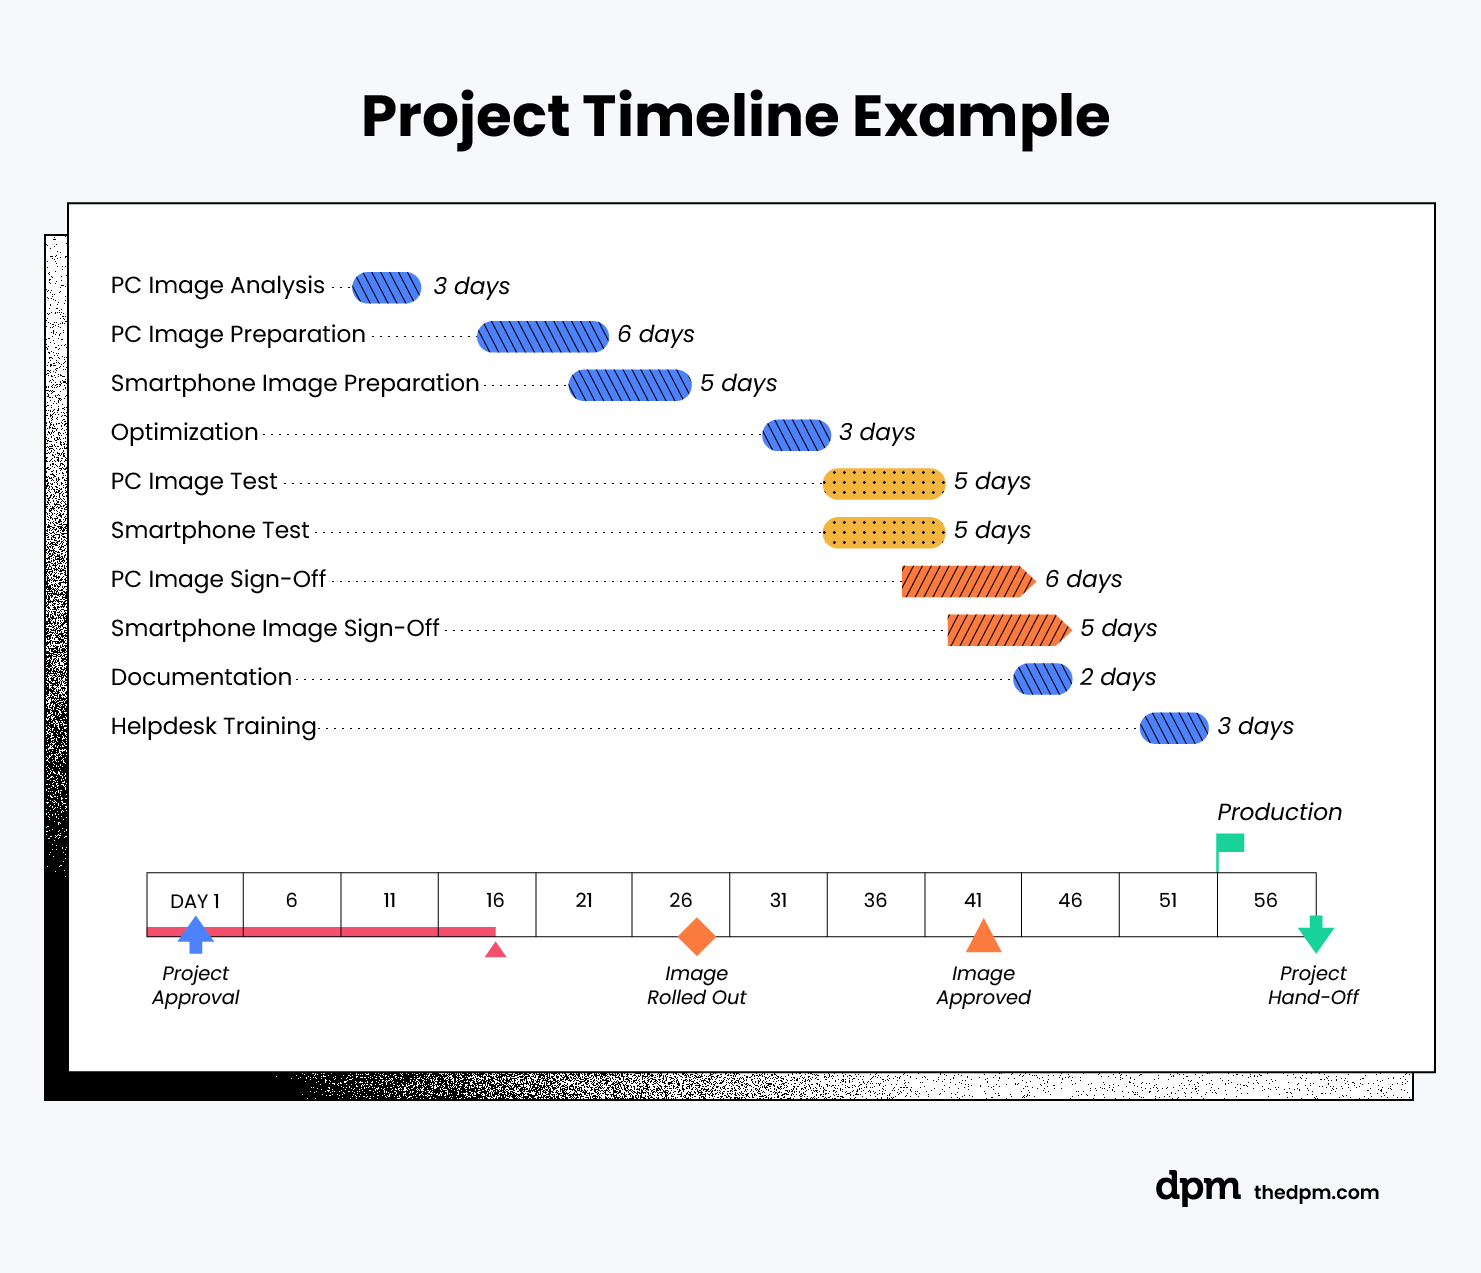 example project timeline in the form of a gantt chart